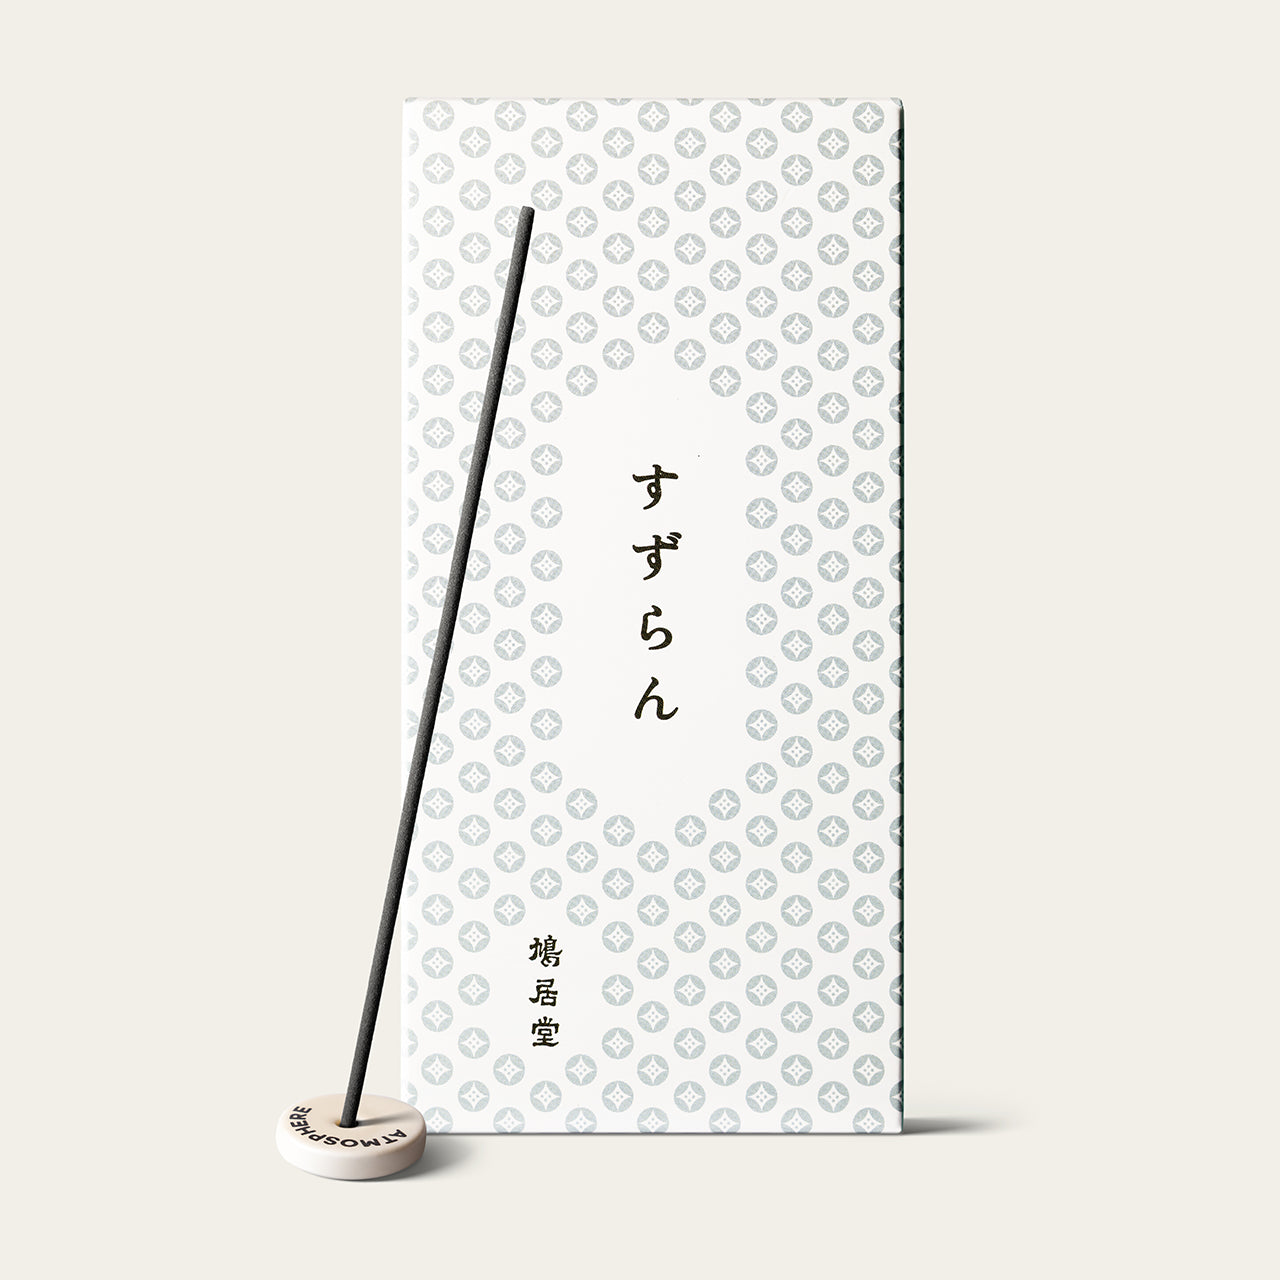 Kyukyodo Fragrance Daily Lily of the Valley Japanese incense sticks (200 sticks) with Atmosphere ceramic incense holder